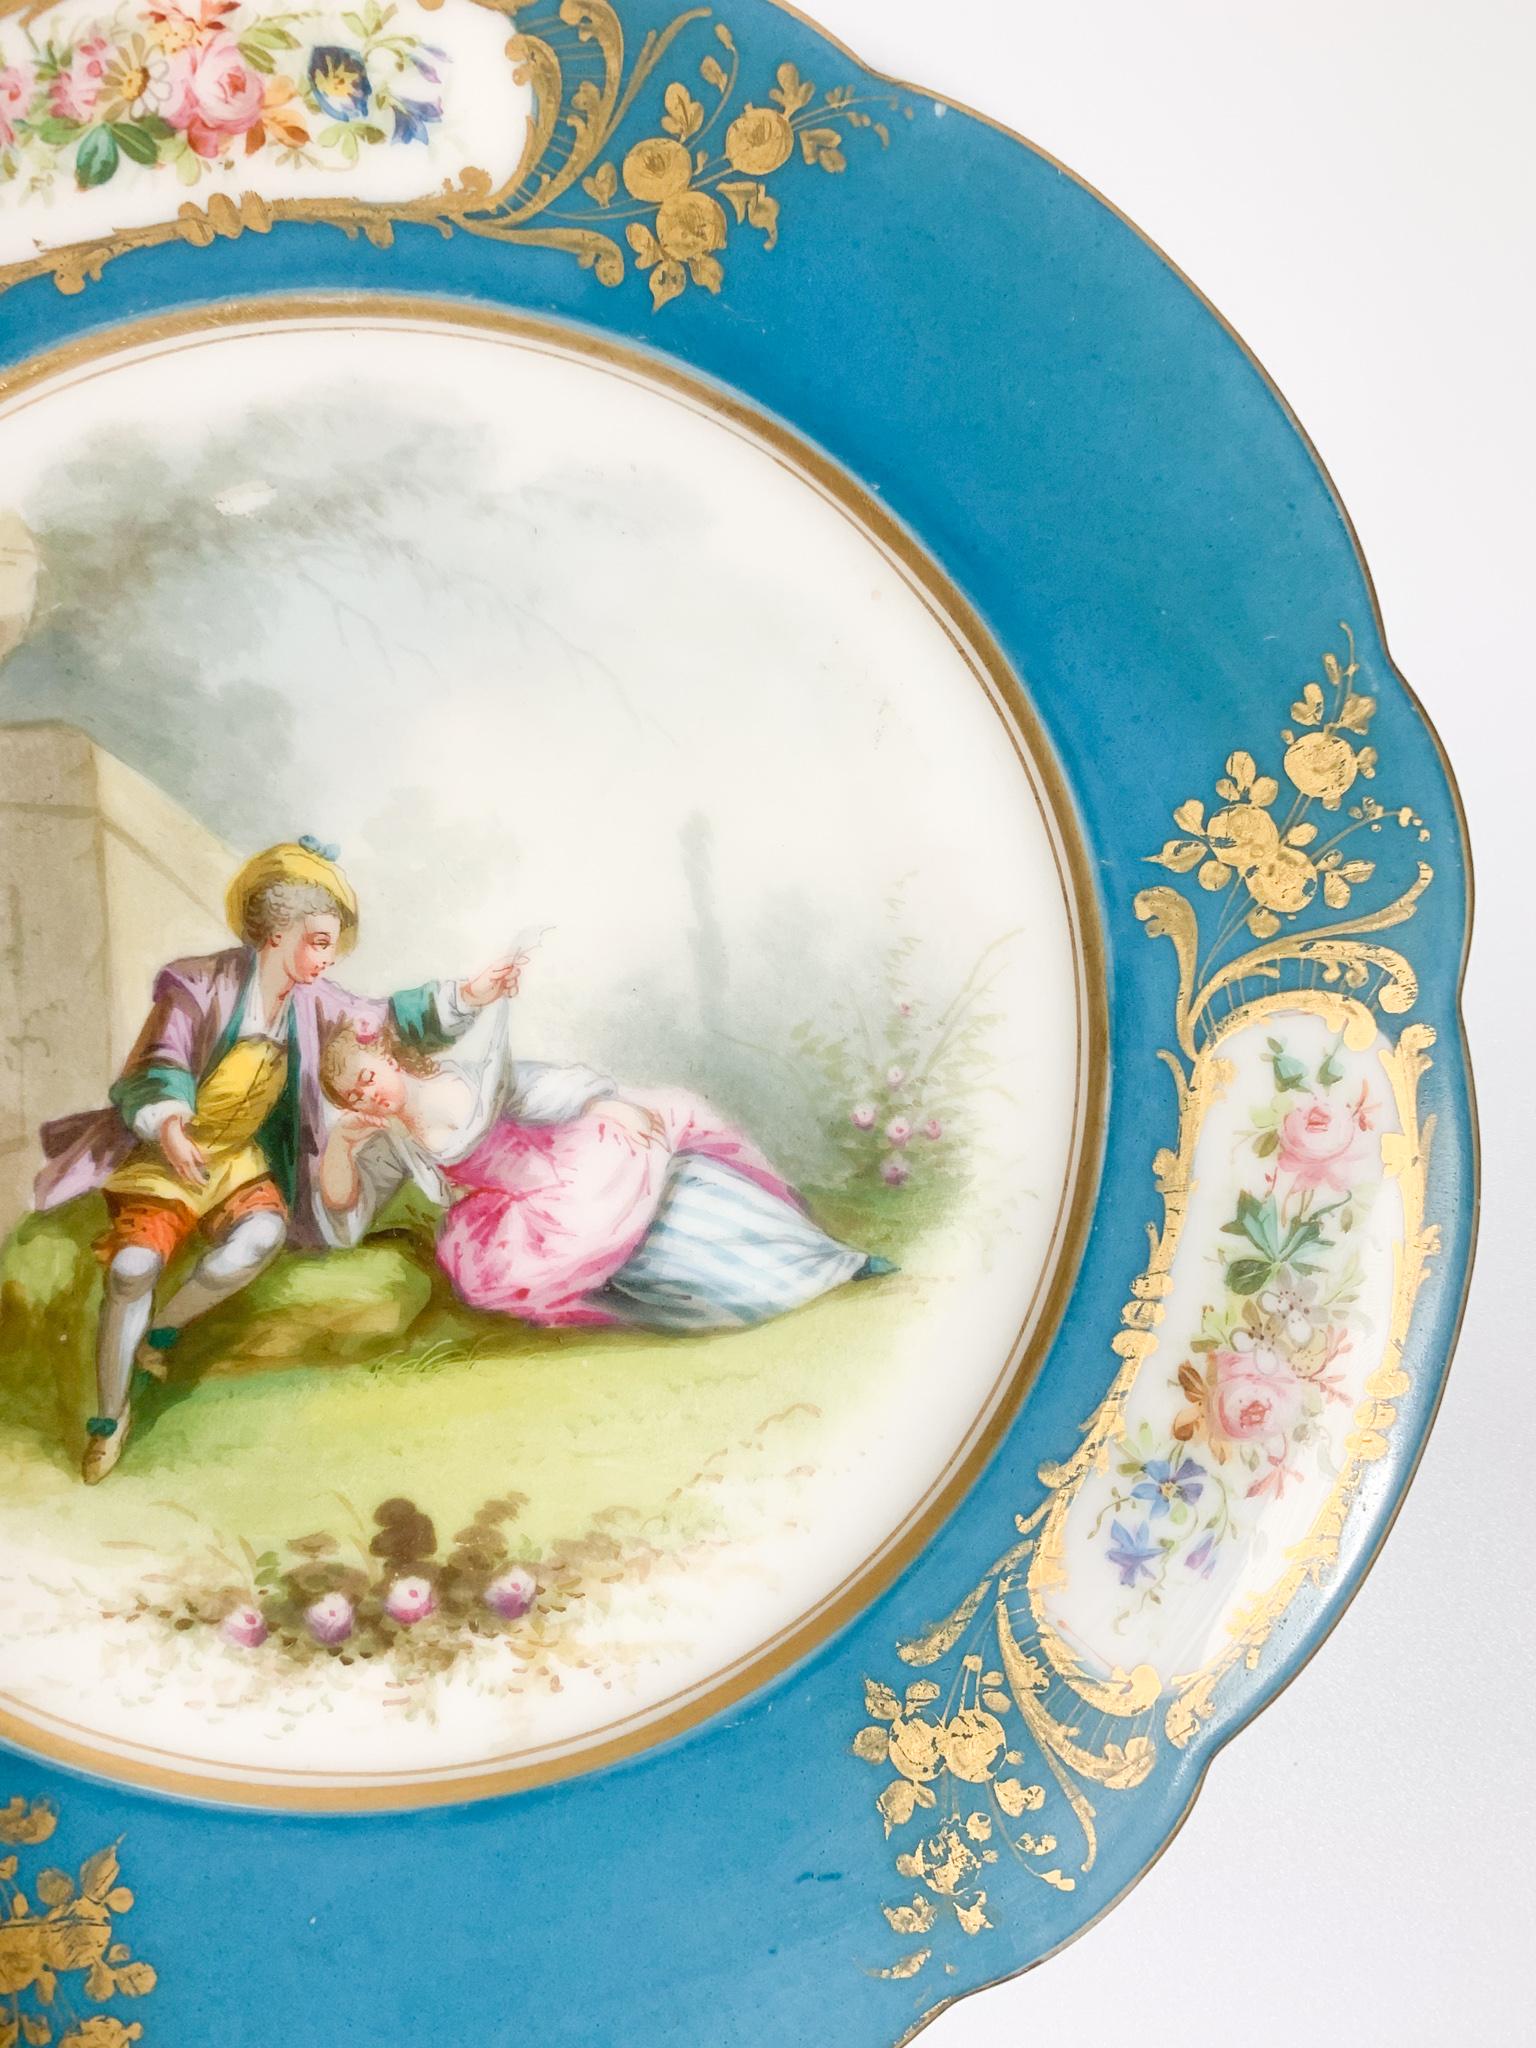 French Sevres Hand Painted Porcelain Plate from the 1800s